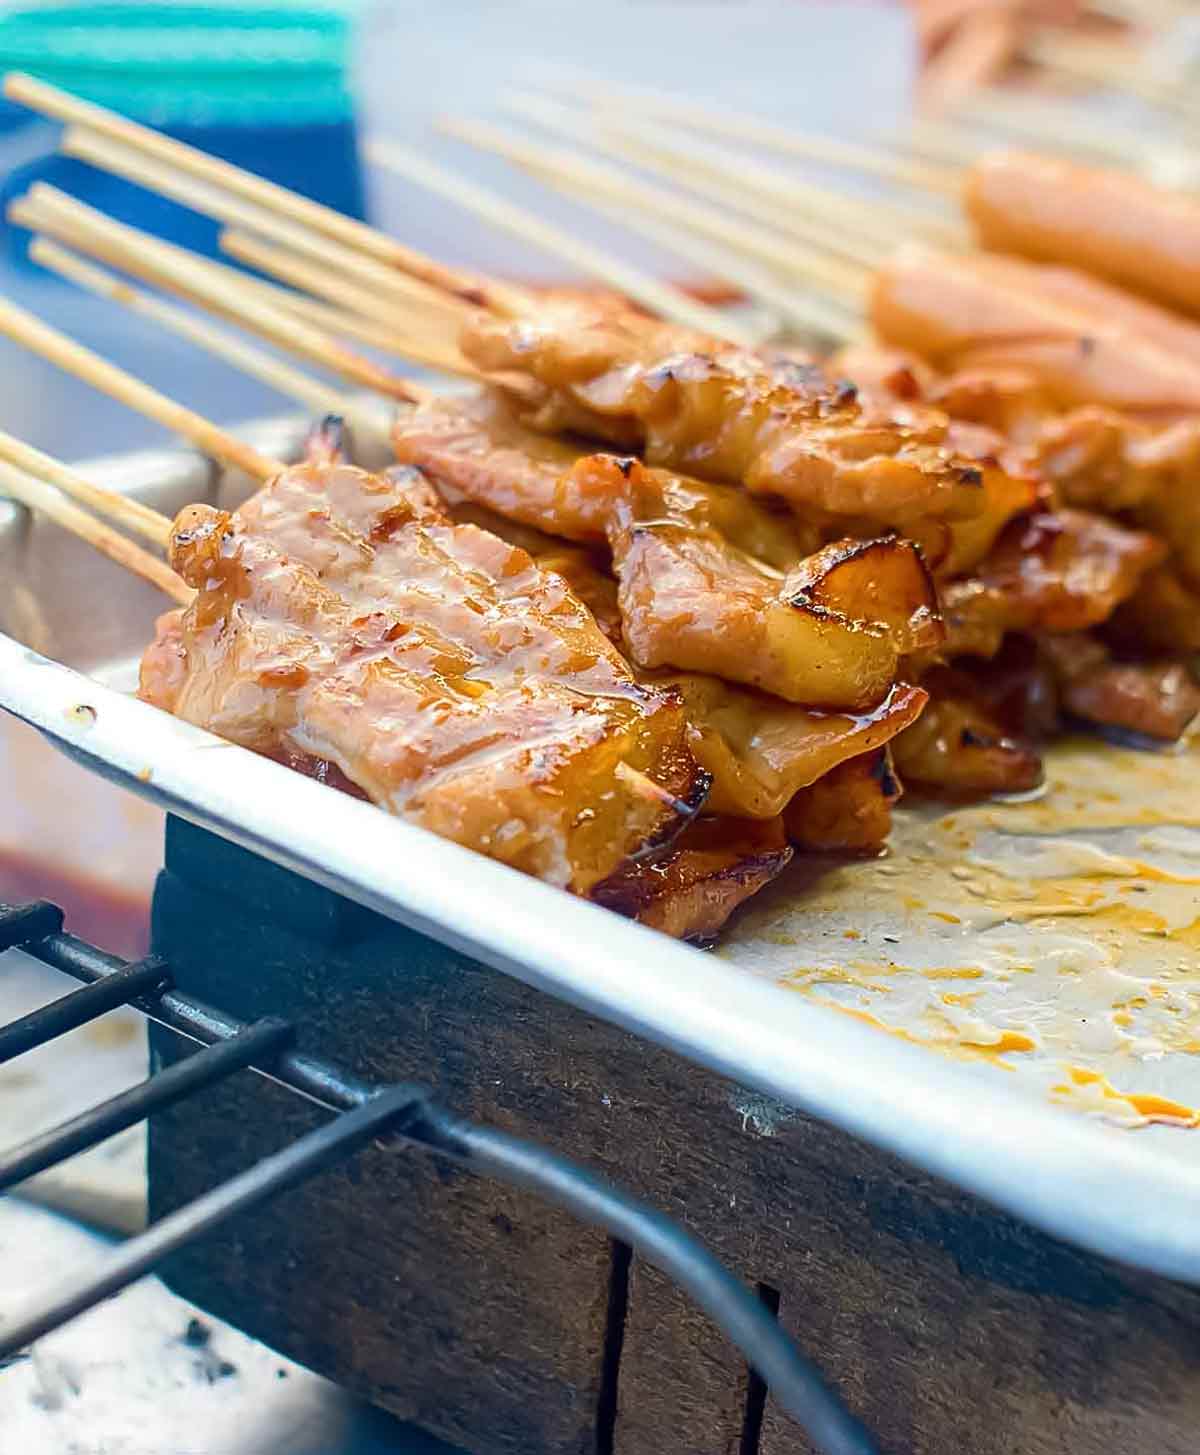 Skewers of thinly sliced Thai-style grilled pork skewers on a metal tray in a street food vendor's cart